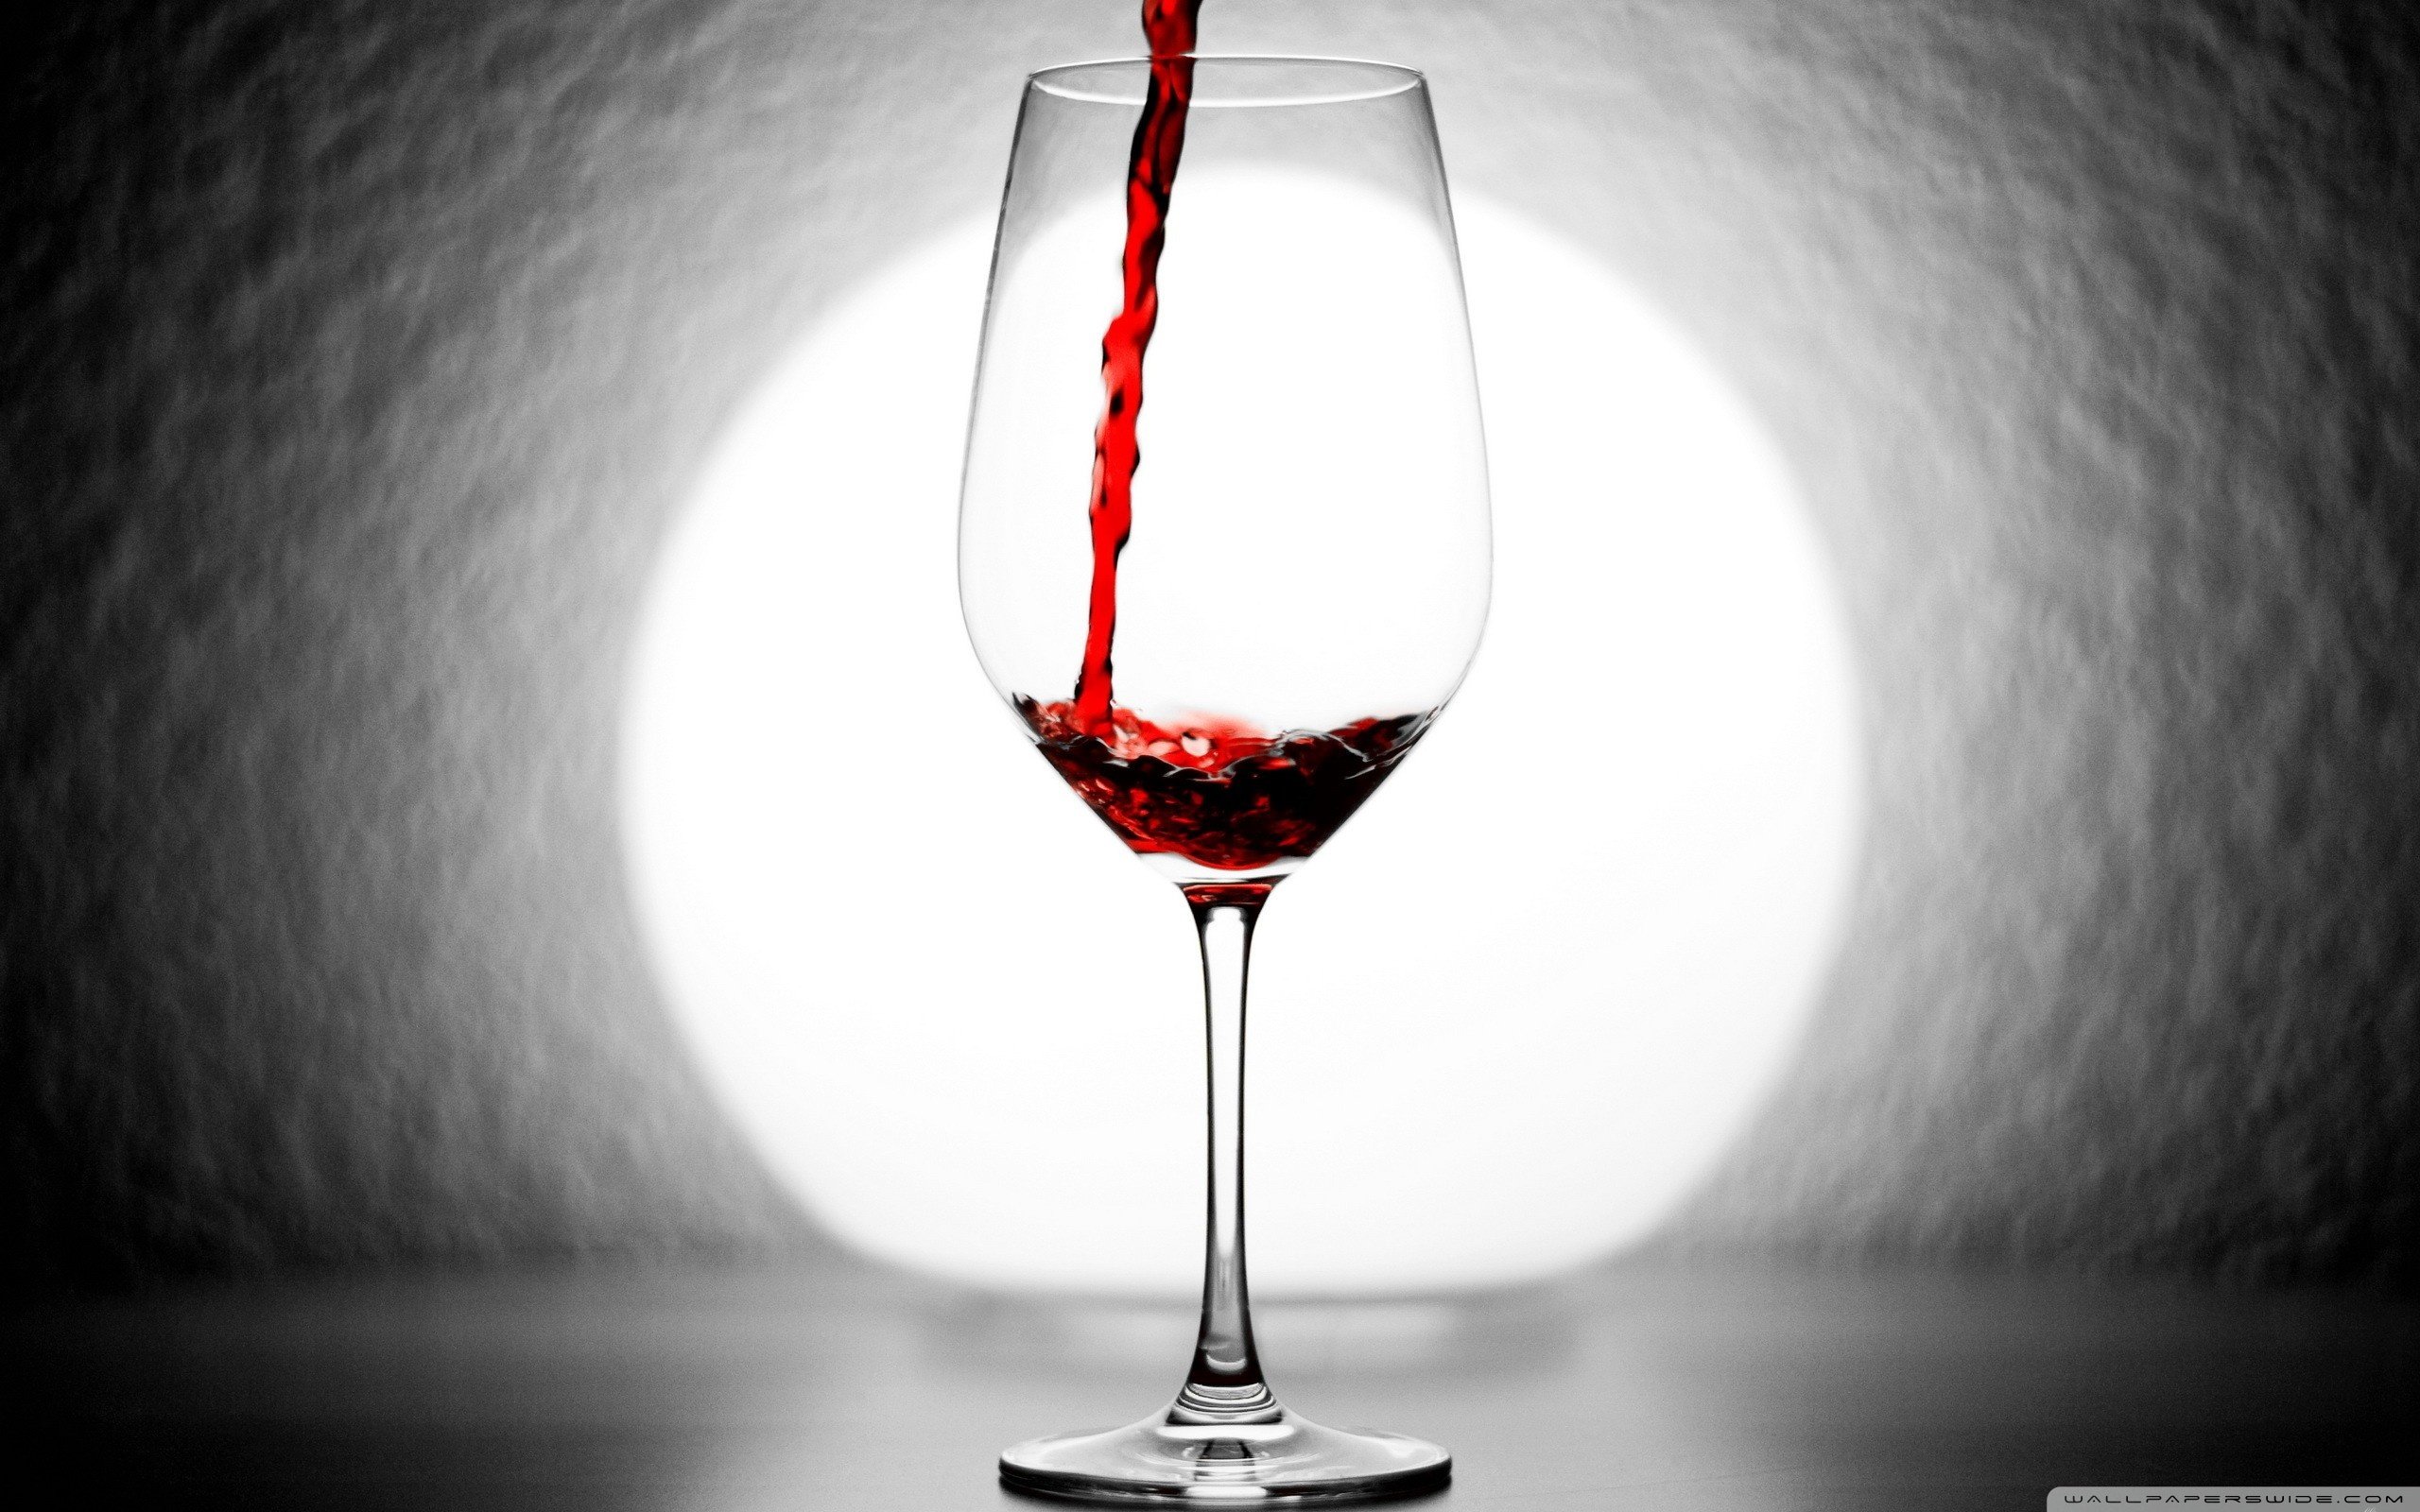 Glass of Red Wine Wallpaper   HQ Free Wallpapers download 100 high